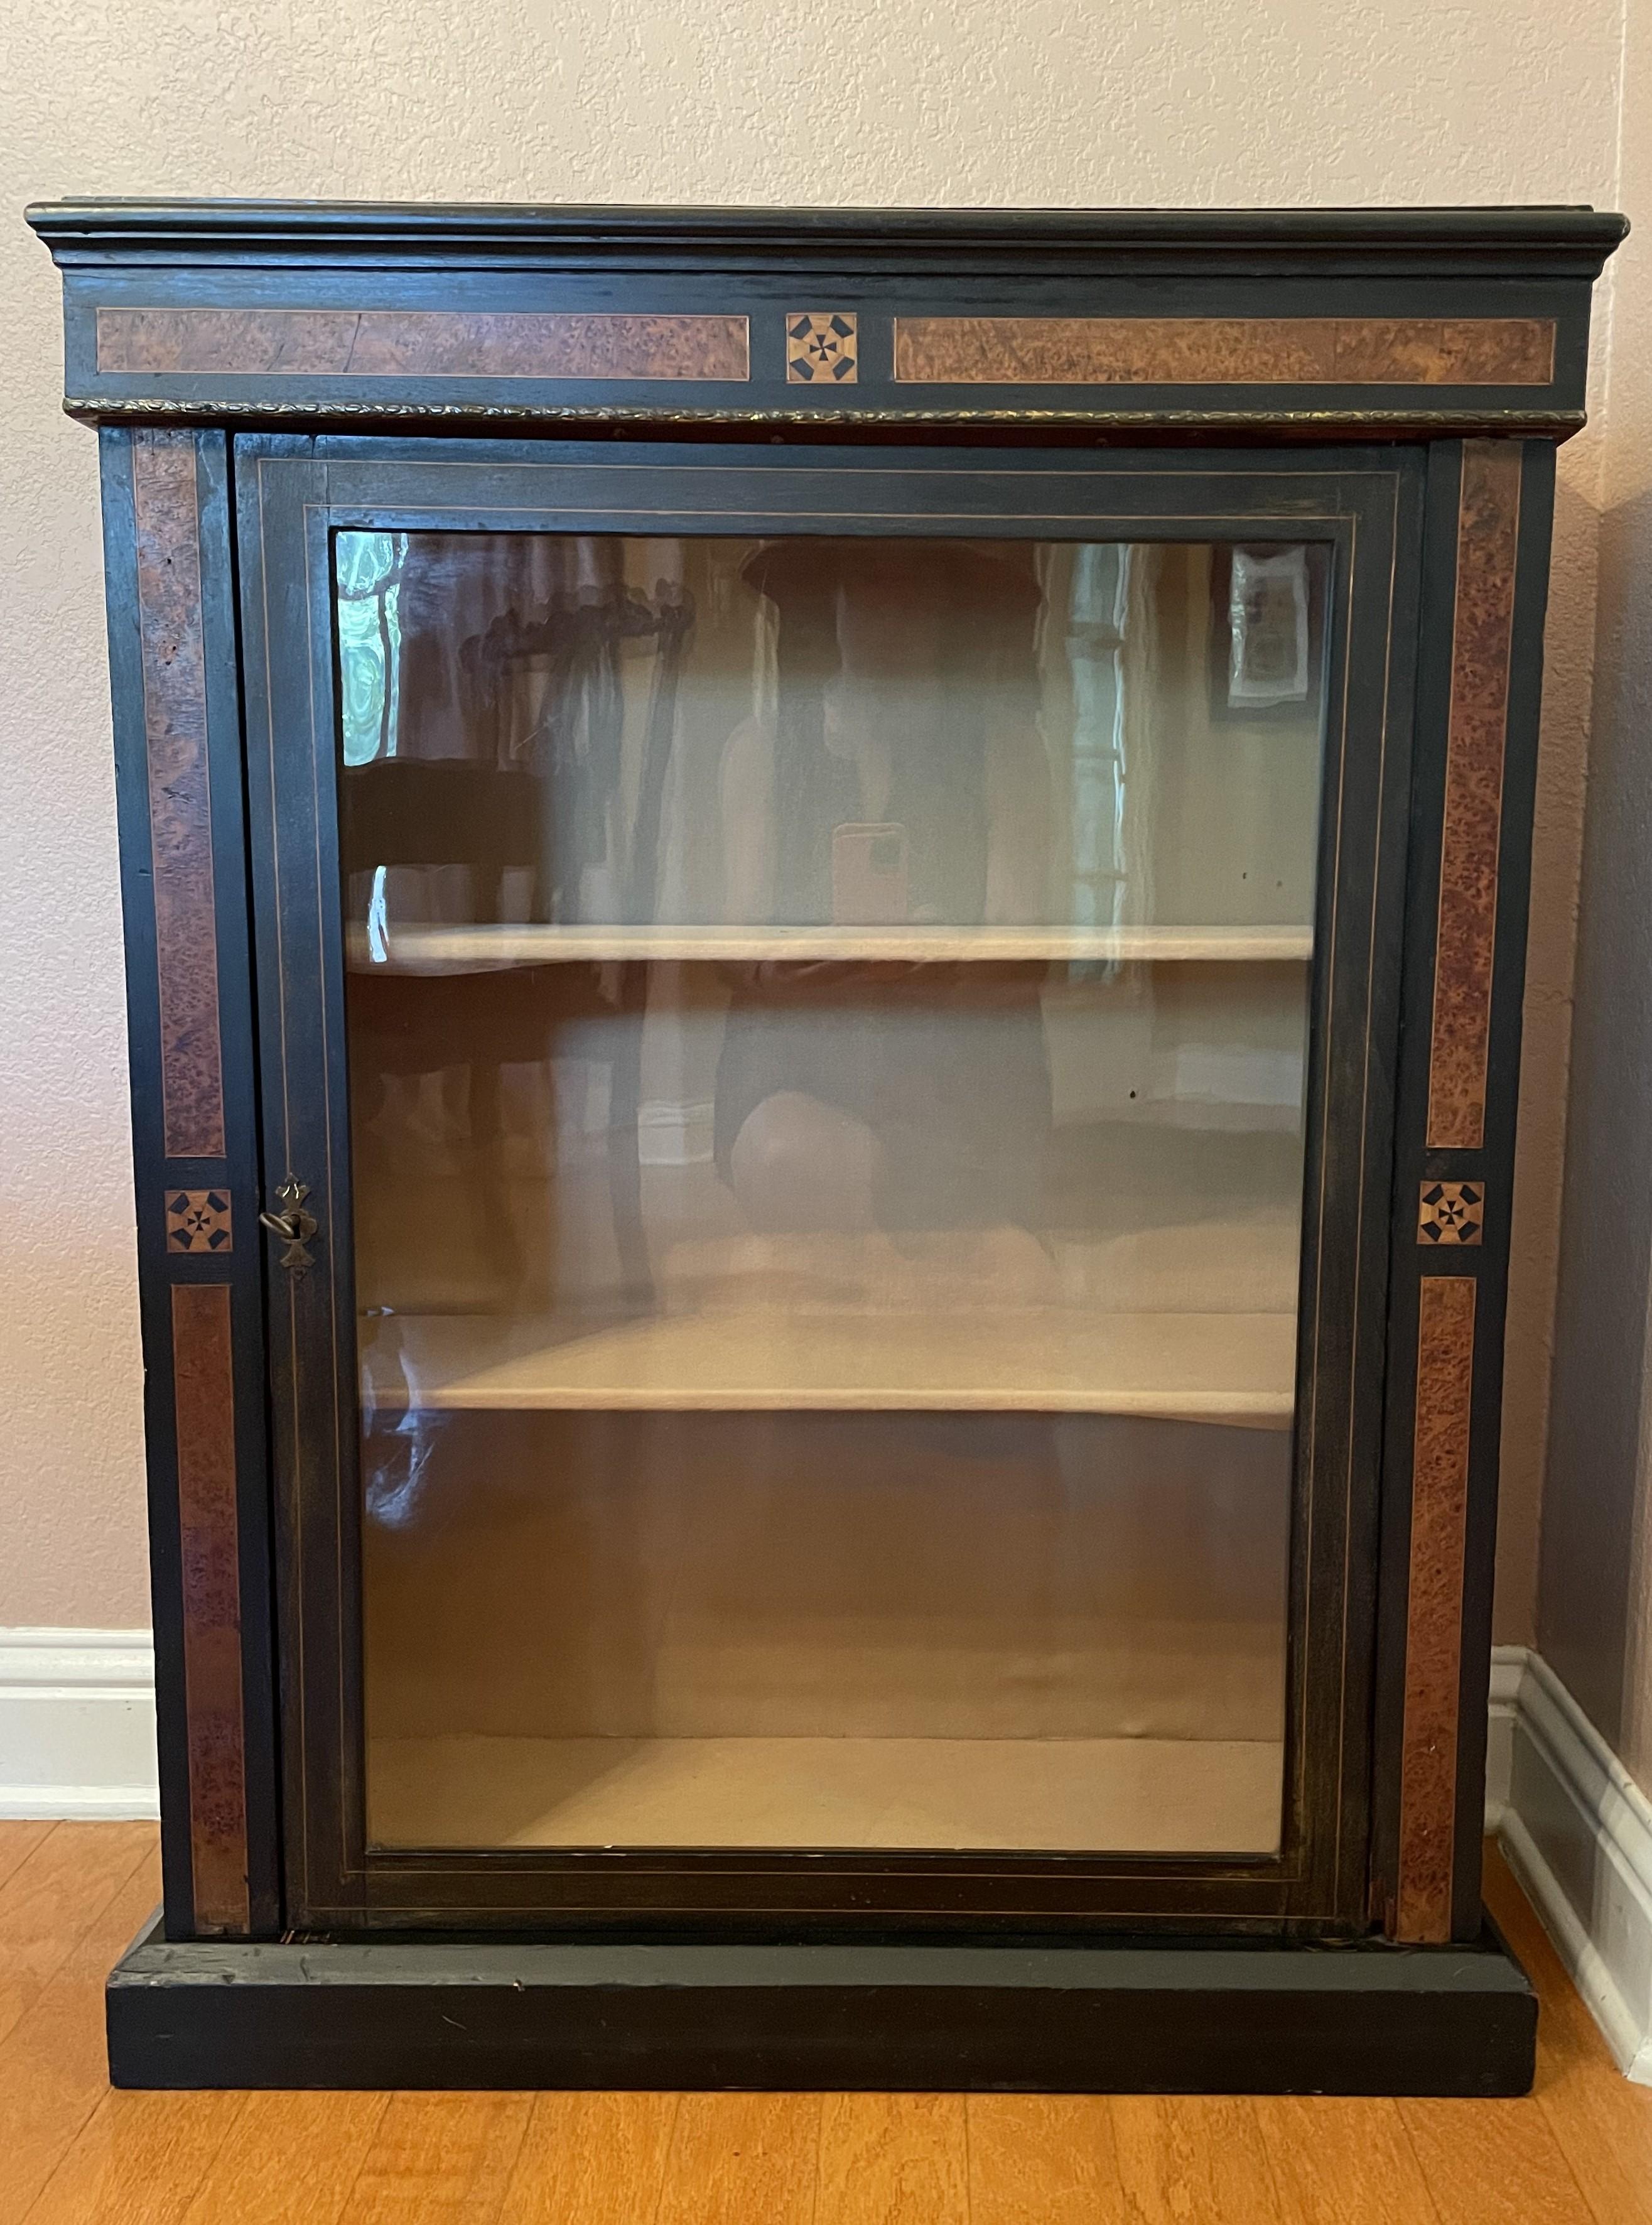 This handsome piece dates to the 19th century. It is most probably a Biedermeier display cabinet, characterized by its structured simple geometry, black wood, burled wood inlays, and antique gold ornamental highlights. The cabinet has three shelves